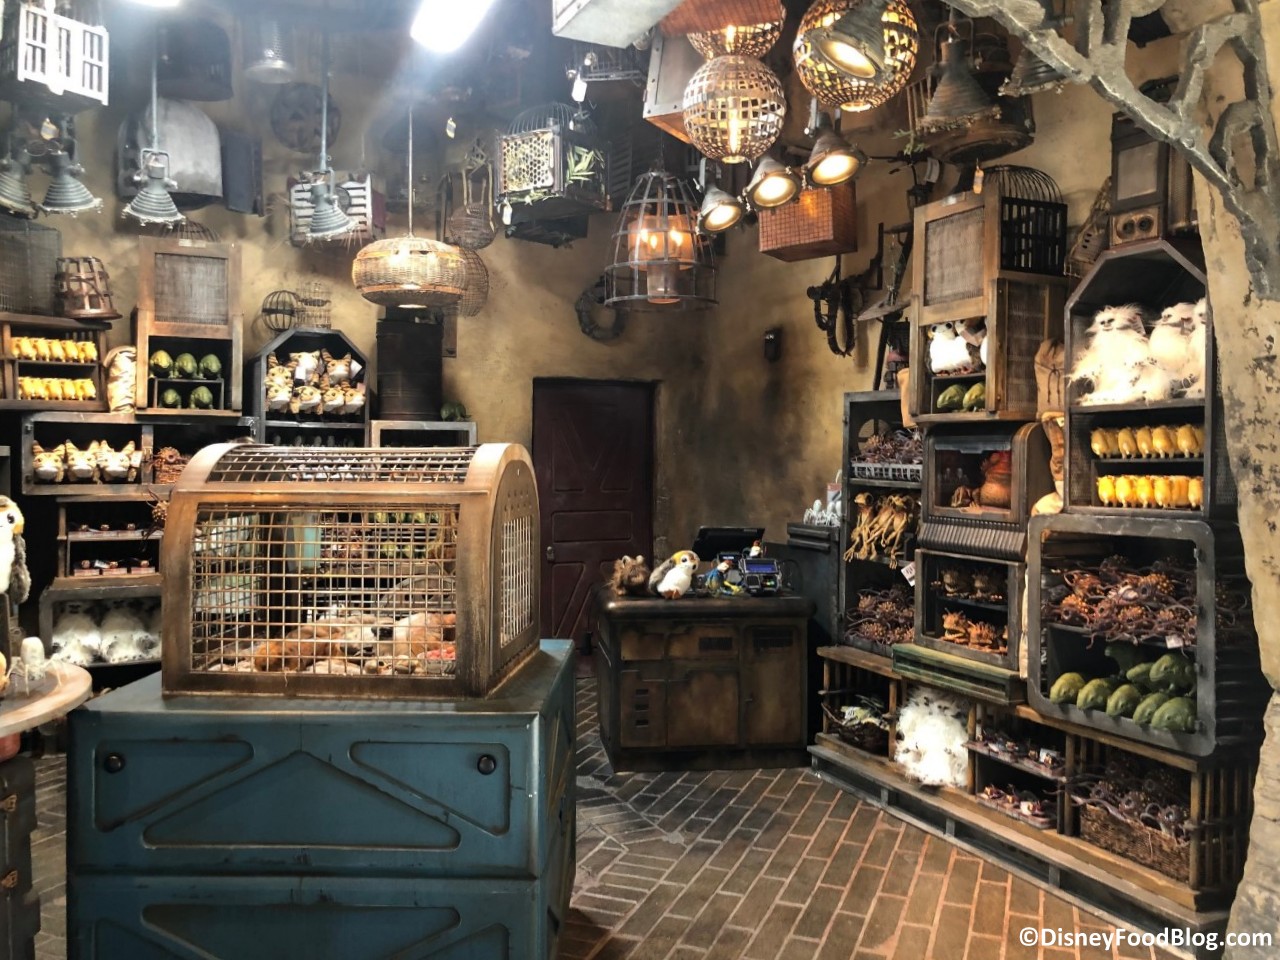 See All the Creatures and Critters at the Creature Stall in Star Wars: Galaxy's Edge! | the disney food blog